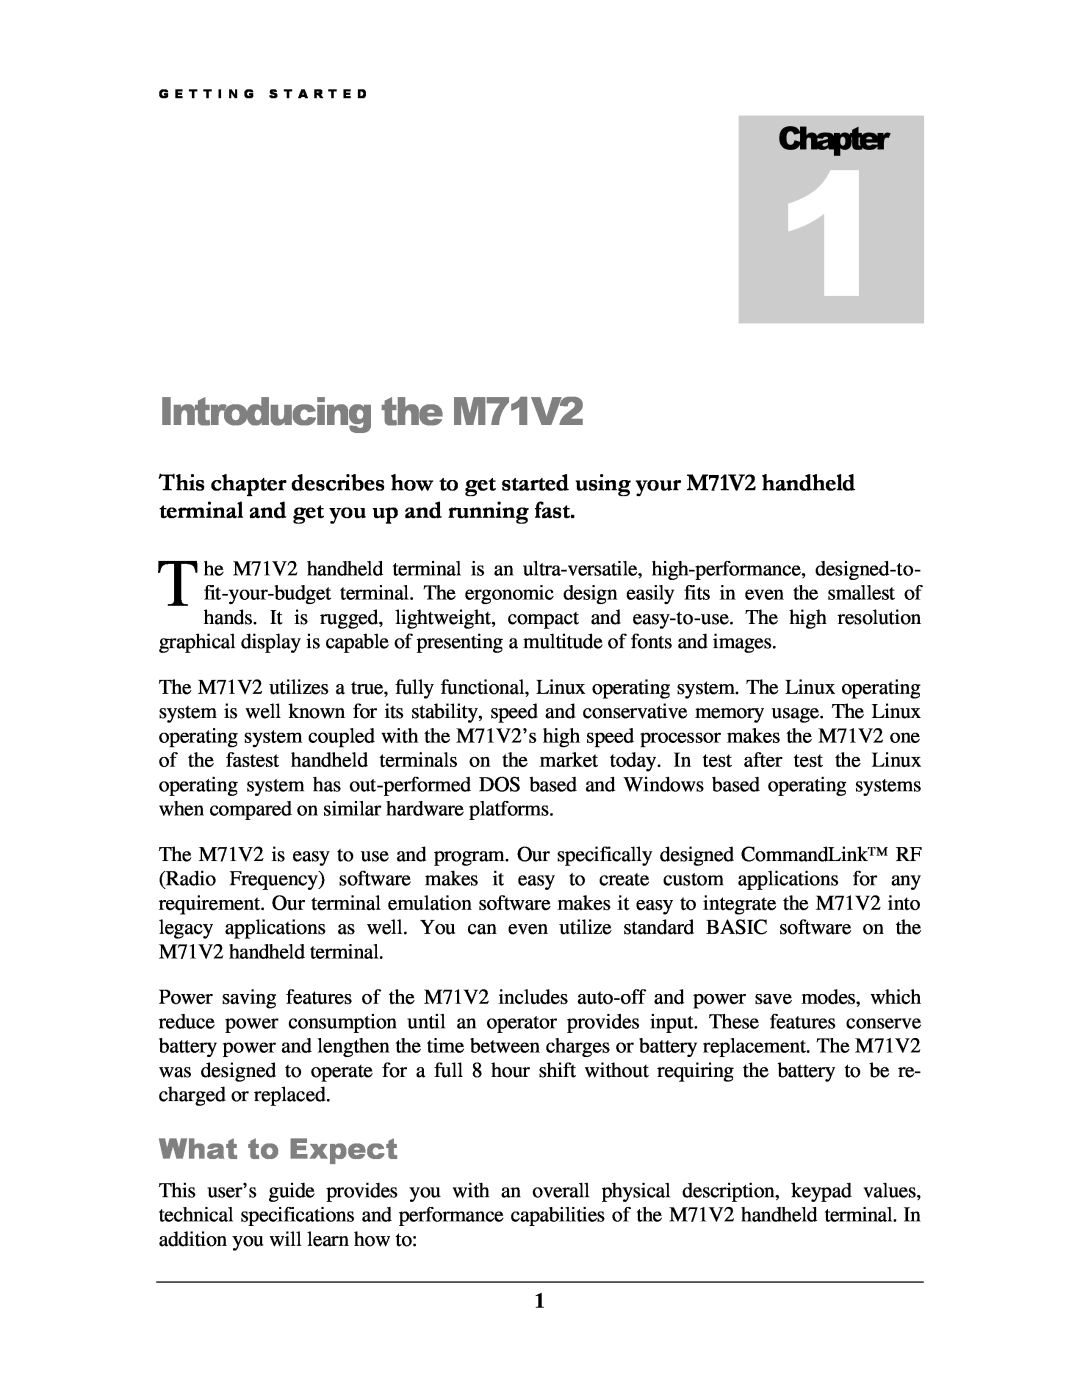 IBM manual Introducing the M71V2, Chapter, What to Expect 